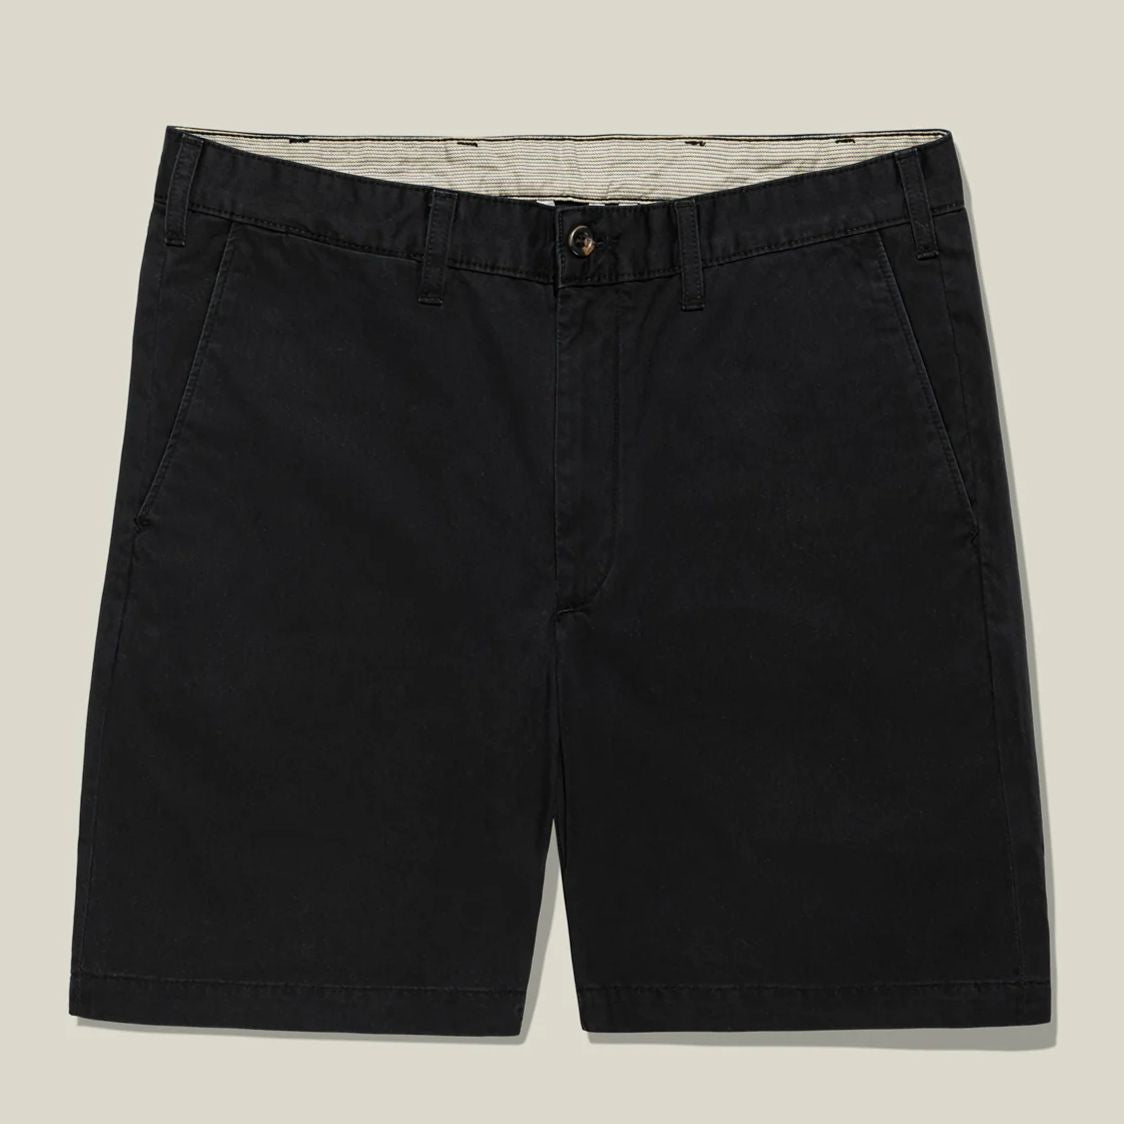 M3 Straight Fit Broken-In Chamois Twill Shorts in Midnight by Bills Khakis